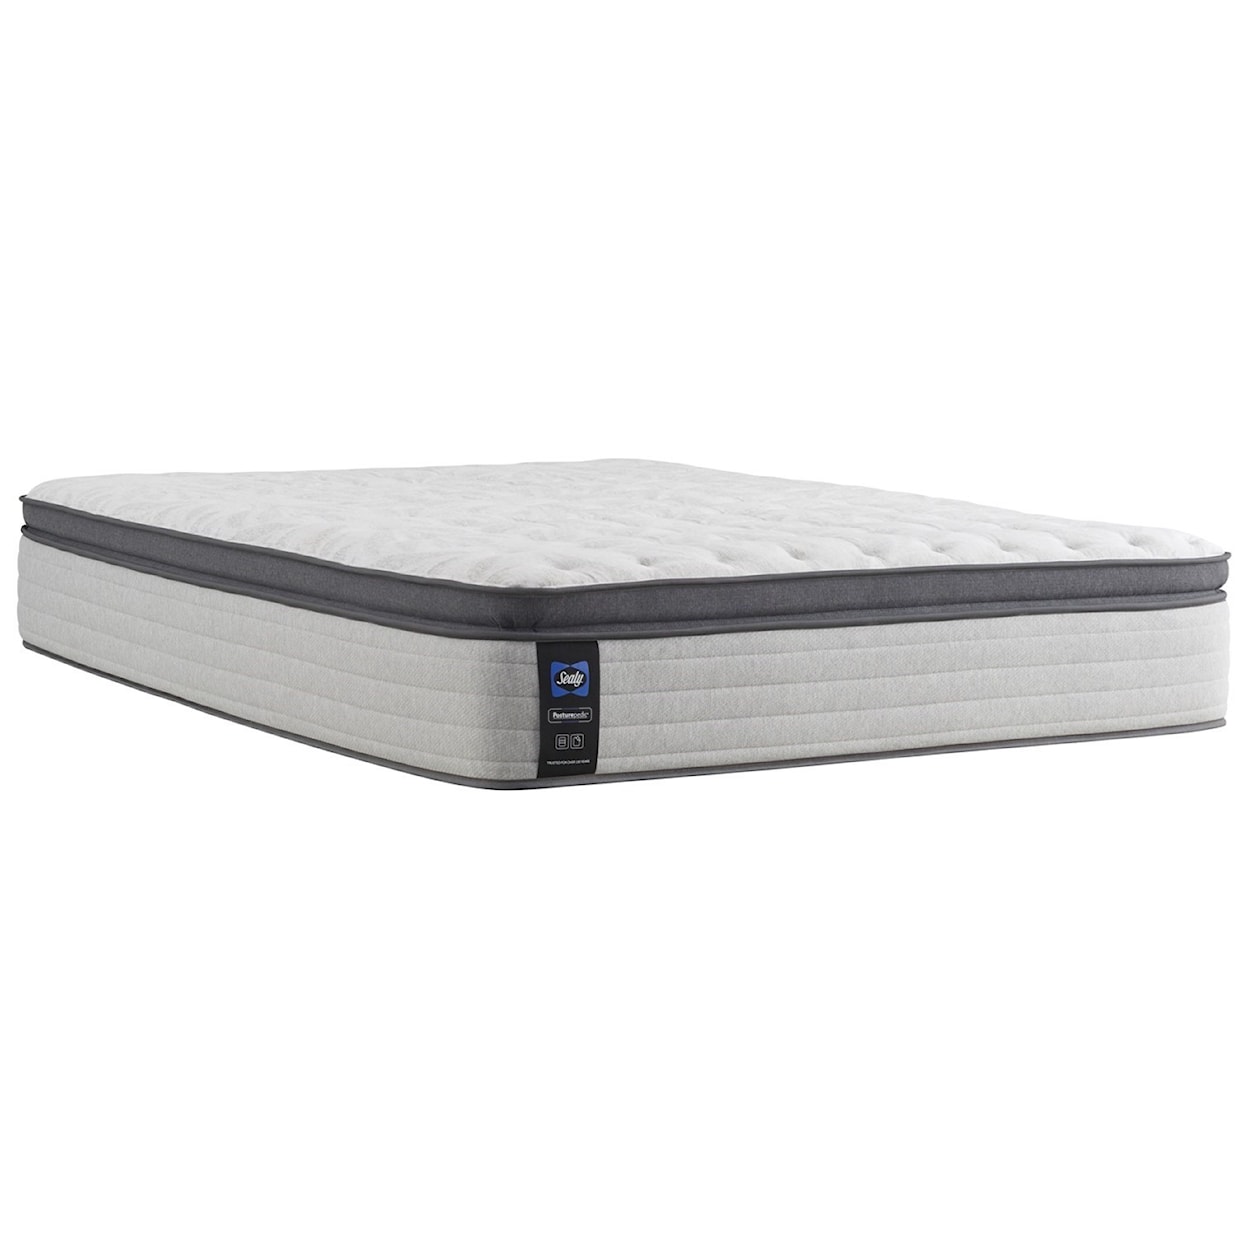 Sealy PPS3 Posturpedic Innerspring Soft EPT Twin XL 14" Soft Euro Pillow Top Mattress